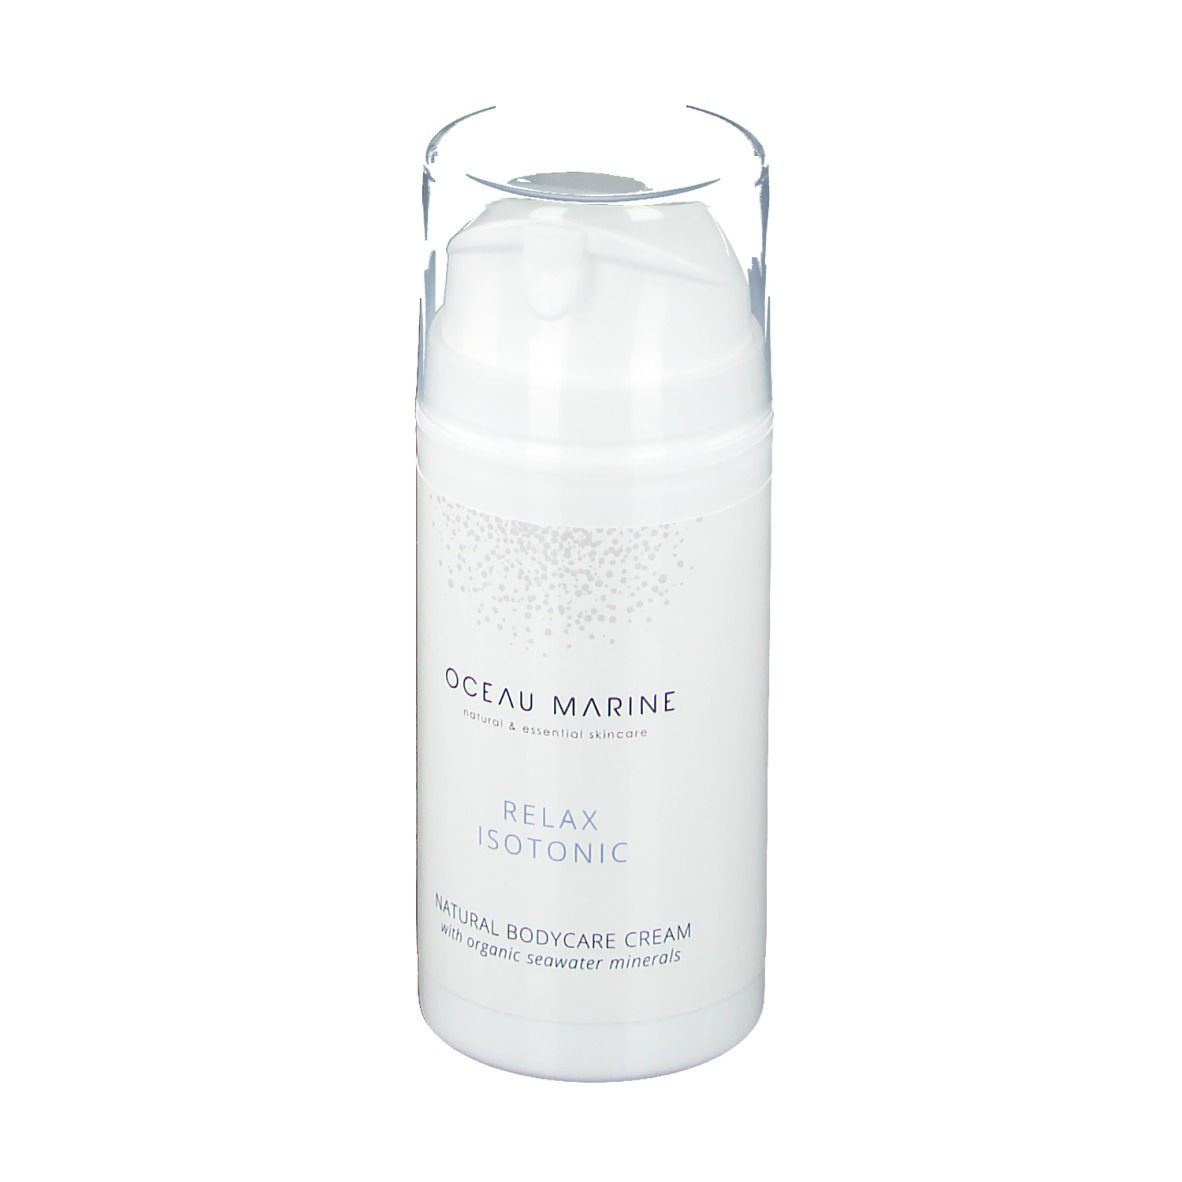 Oceau Marine Relax Isotonic Crème